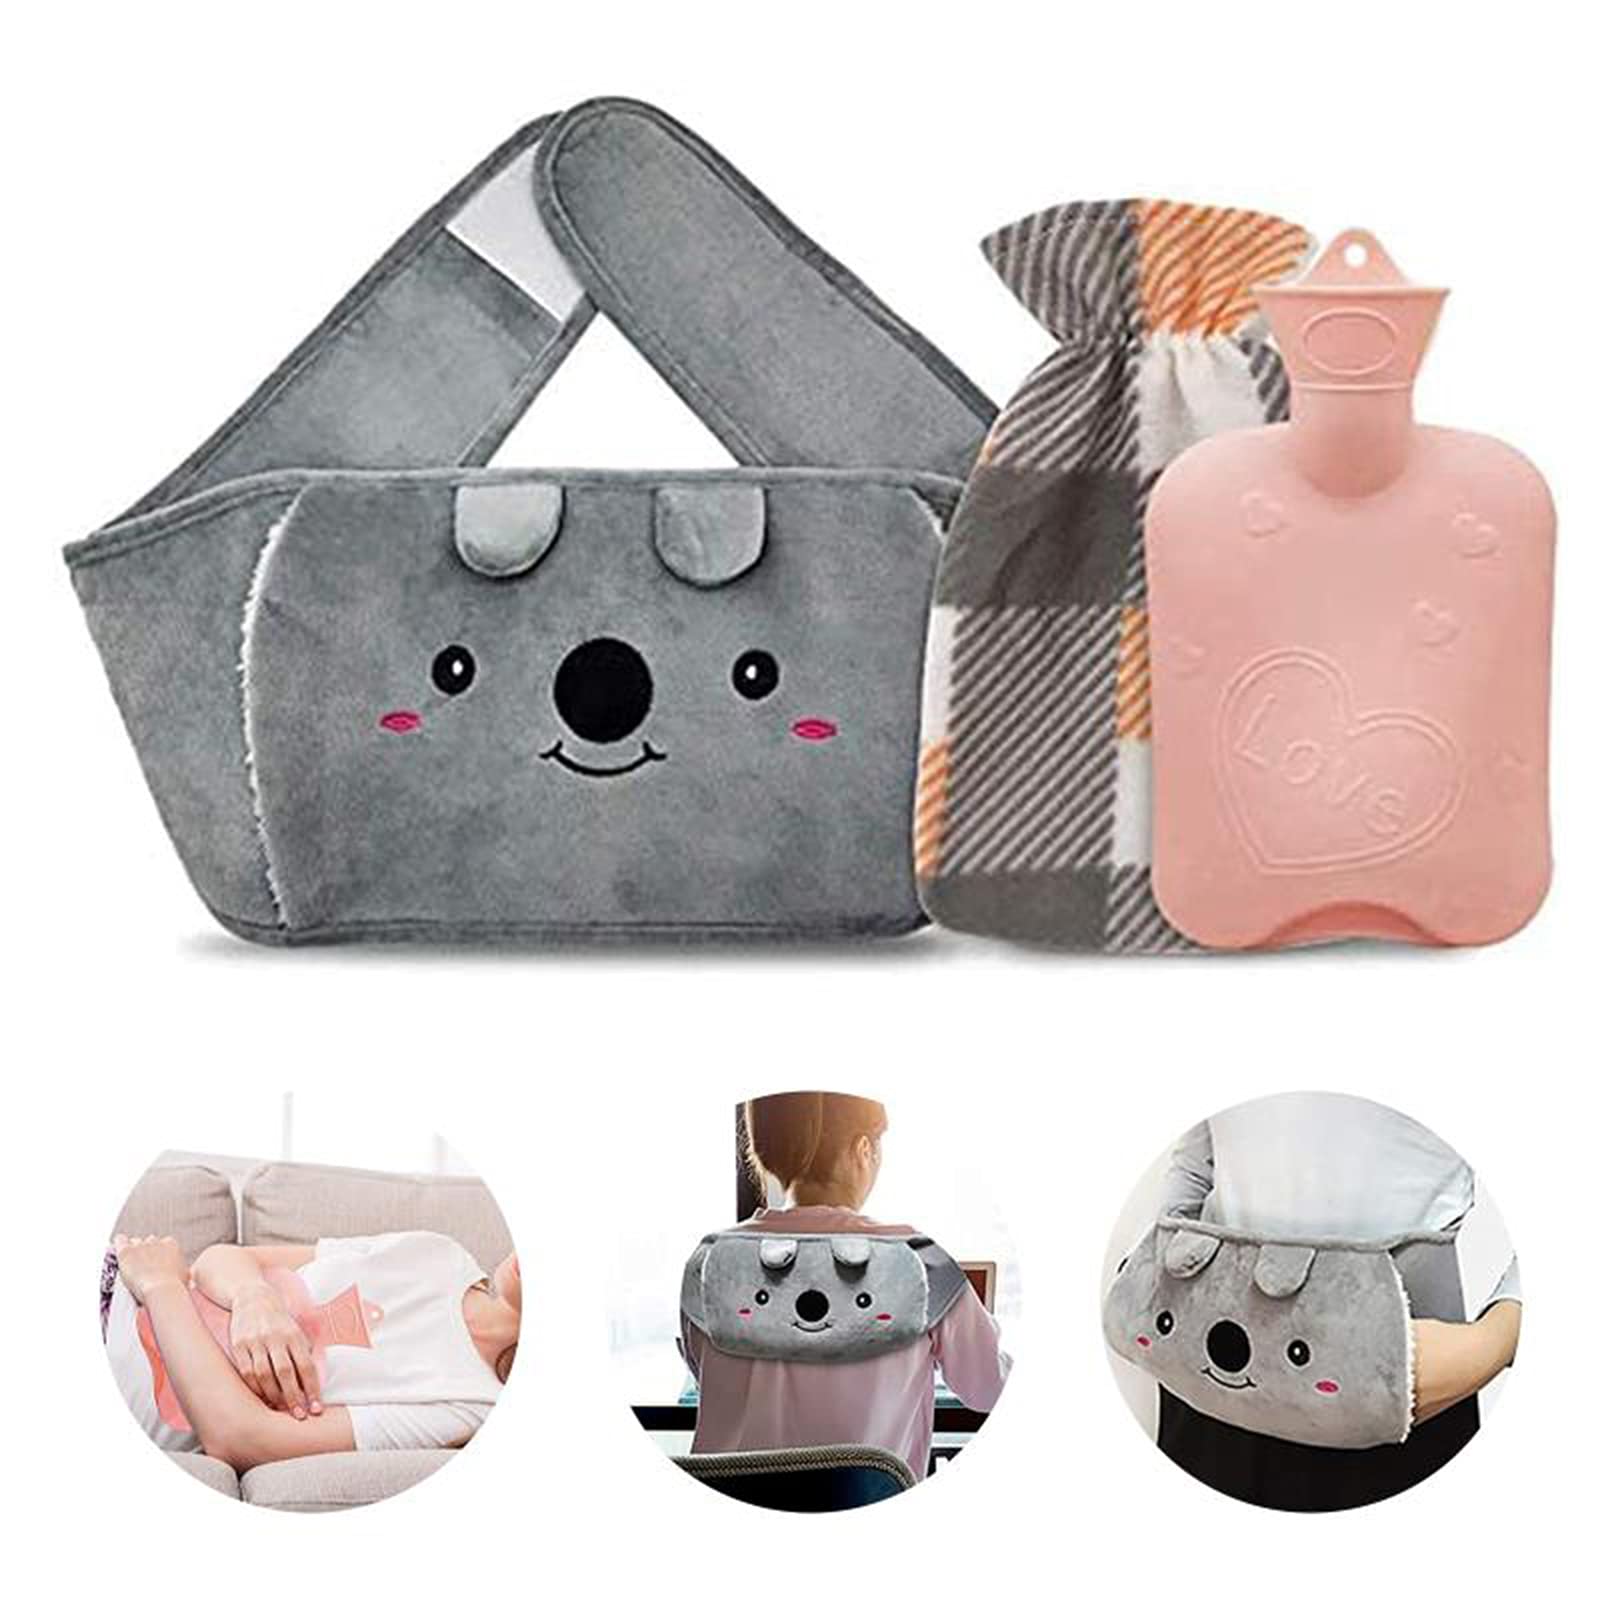 Hot Water Bag,Hot Water Bottle Rubber Warm Water Bag Pouch with Soft Waist Cover